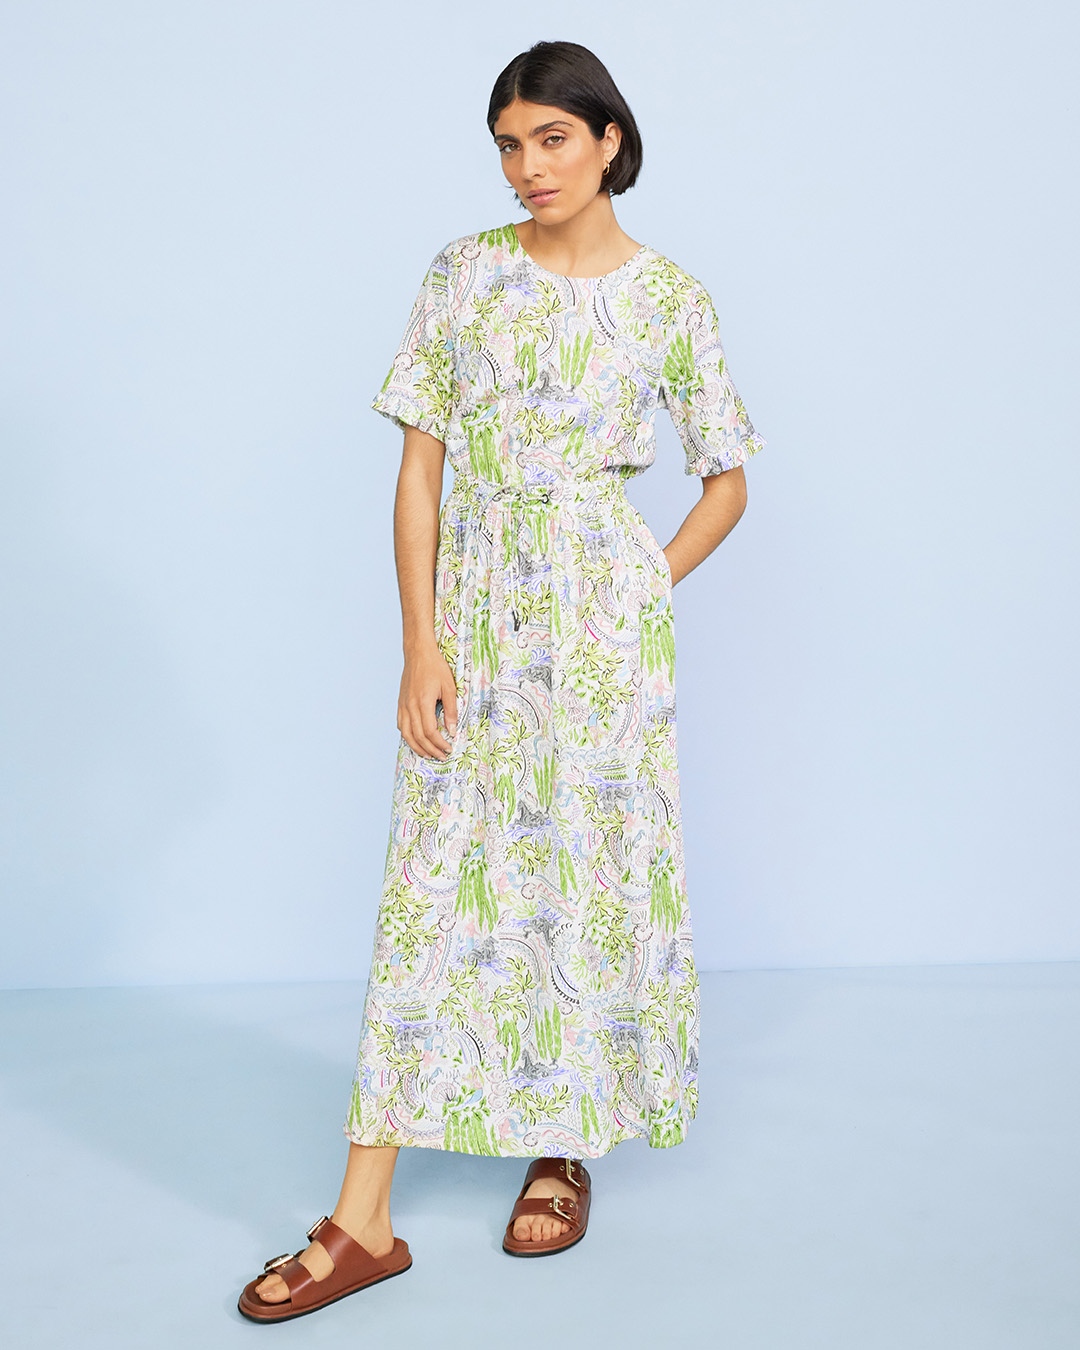 Shop Thought's collection of clean, ethical and recycled tops, dresses, jumpsuits, trousers and more at up to 70% off!  Kind to your wallet and the planet.